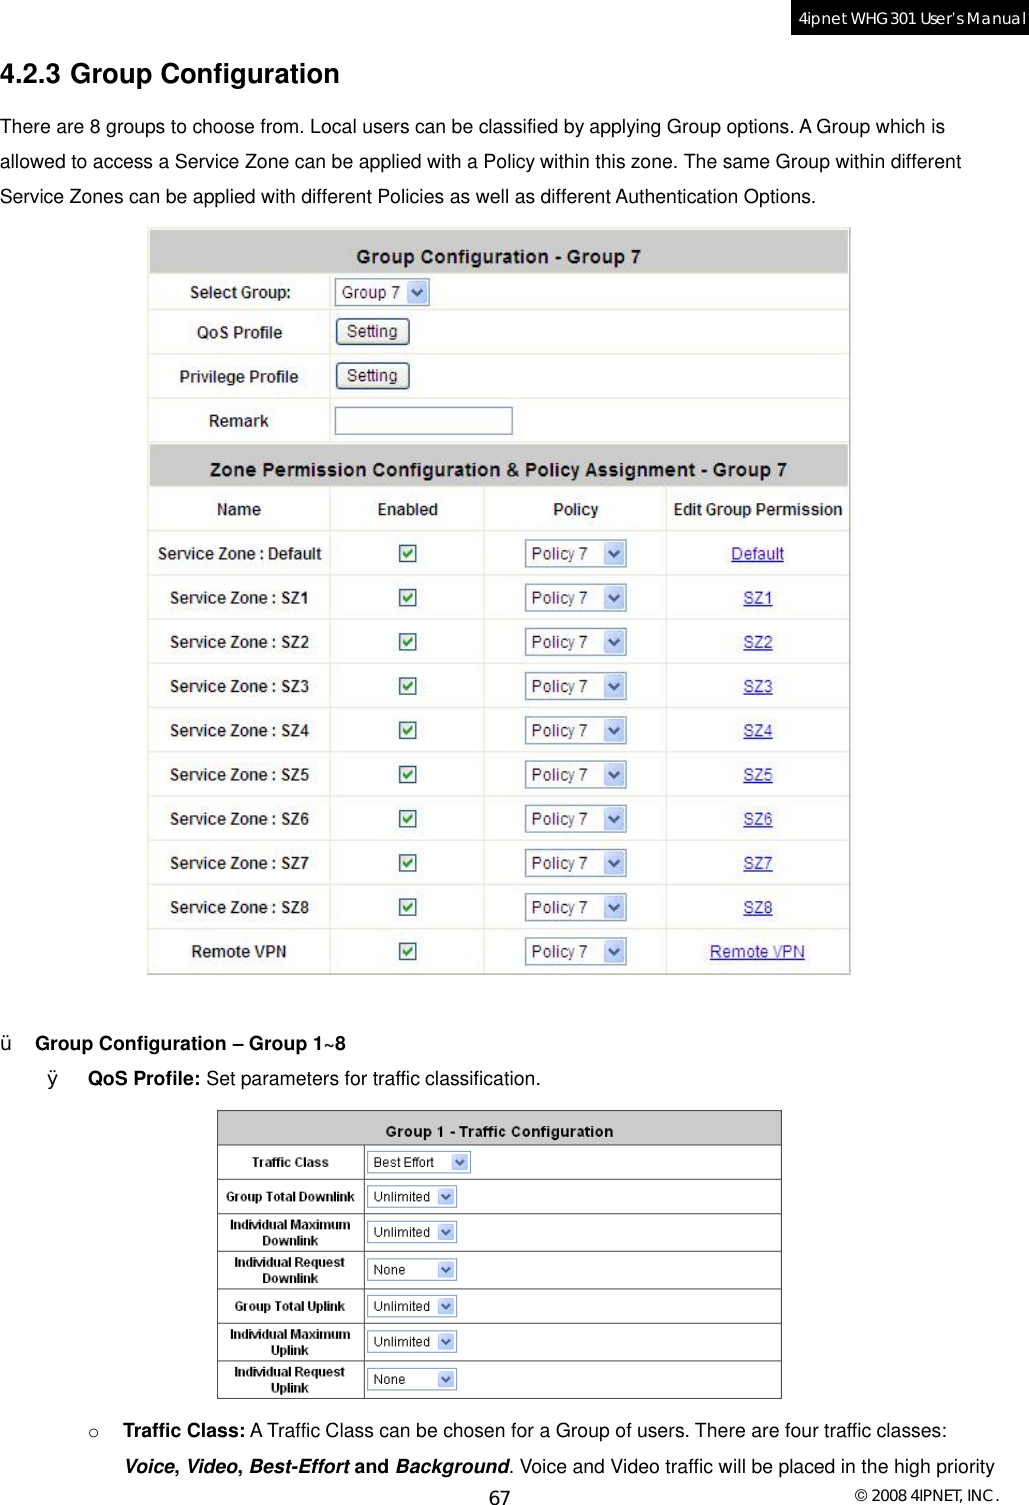  © 2008 4IPNET, INC. 67 4ipnet WHG301 User’s Manual  4.2.3 Group Configuration There are 8 groups to choose from. Local users can be classified by applying Group options. A Group which is allowed to access a Service Zone can be applied with a Policy within this zone. The same Group within different Service Zones can be applied with different Policies as well as different Authentication Options.    Ÿ  Group Configuration – Group 1~8 Ø  QoS Profile: Set parameters for traffic classification.   o  Traffic Class: A Traffic Class can be chosen for a Group of users. There are four traffic classes: Voice, Video, Best-Effort and Background. Voice and Video traffic will be placed in the high priority 